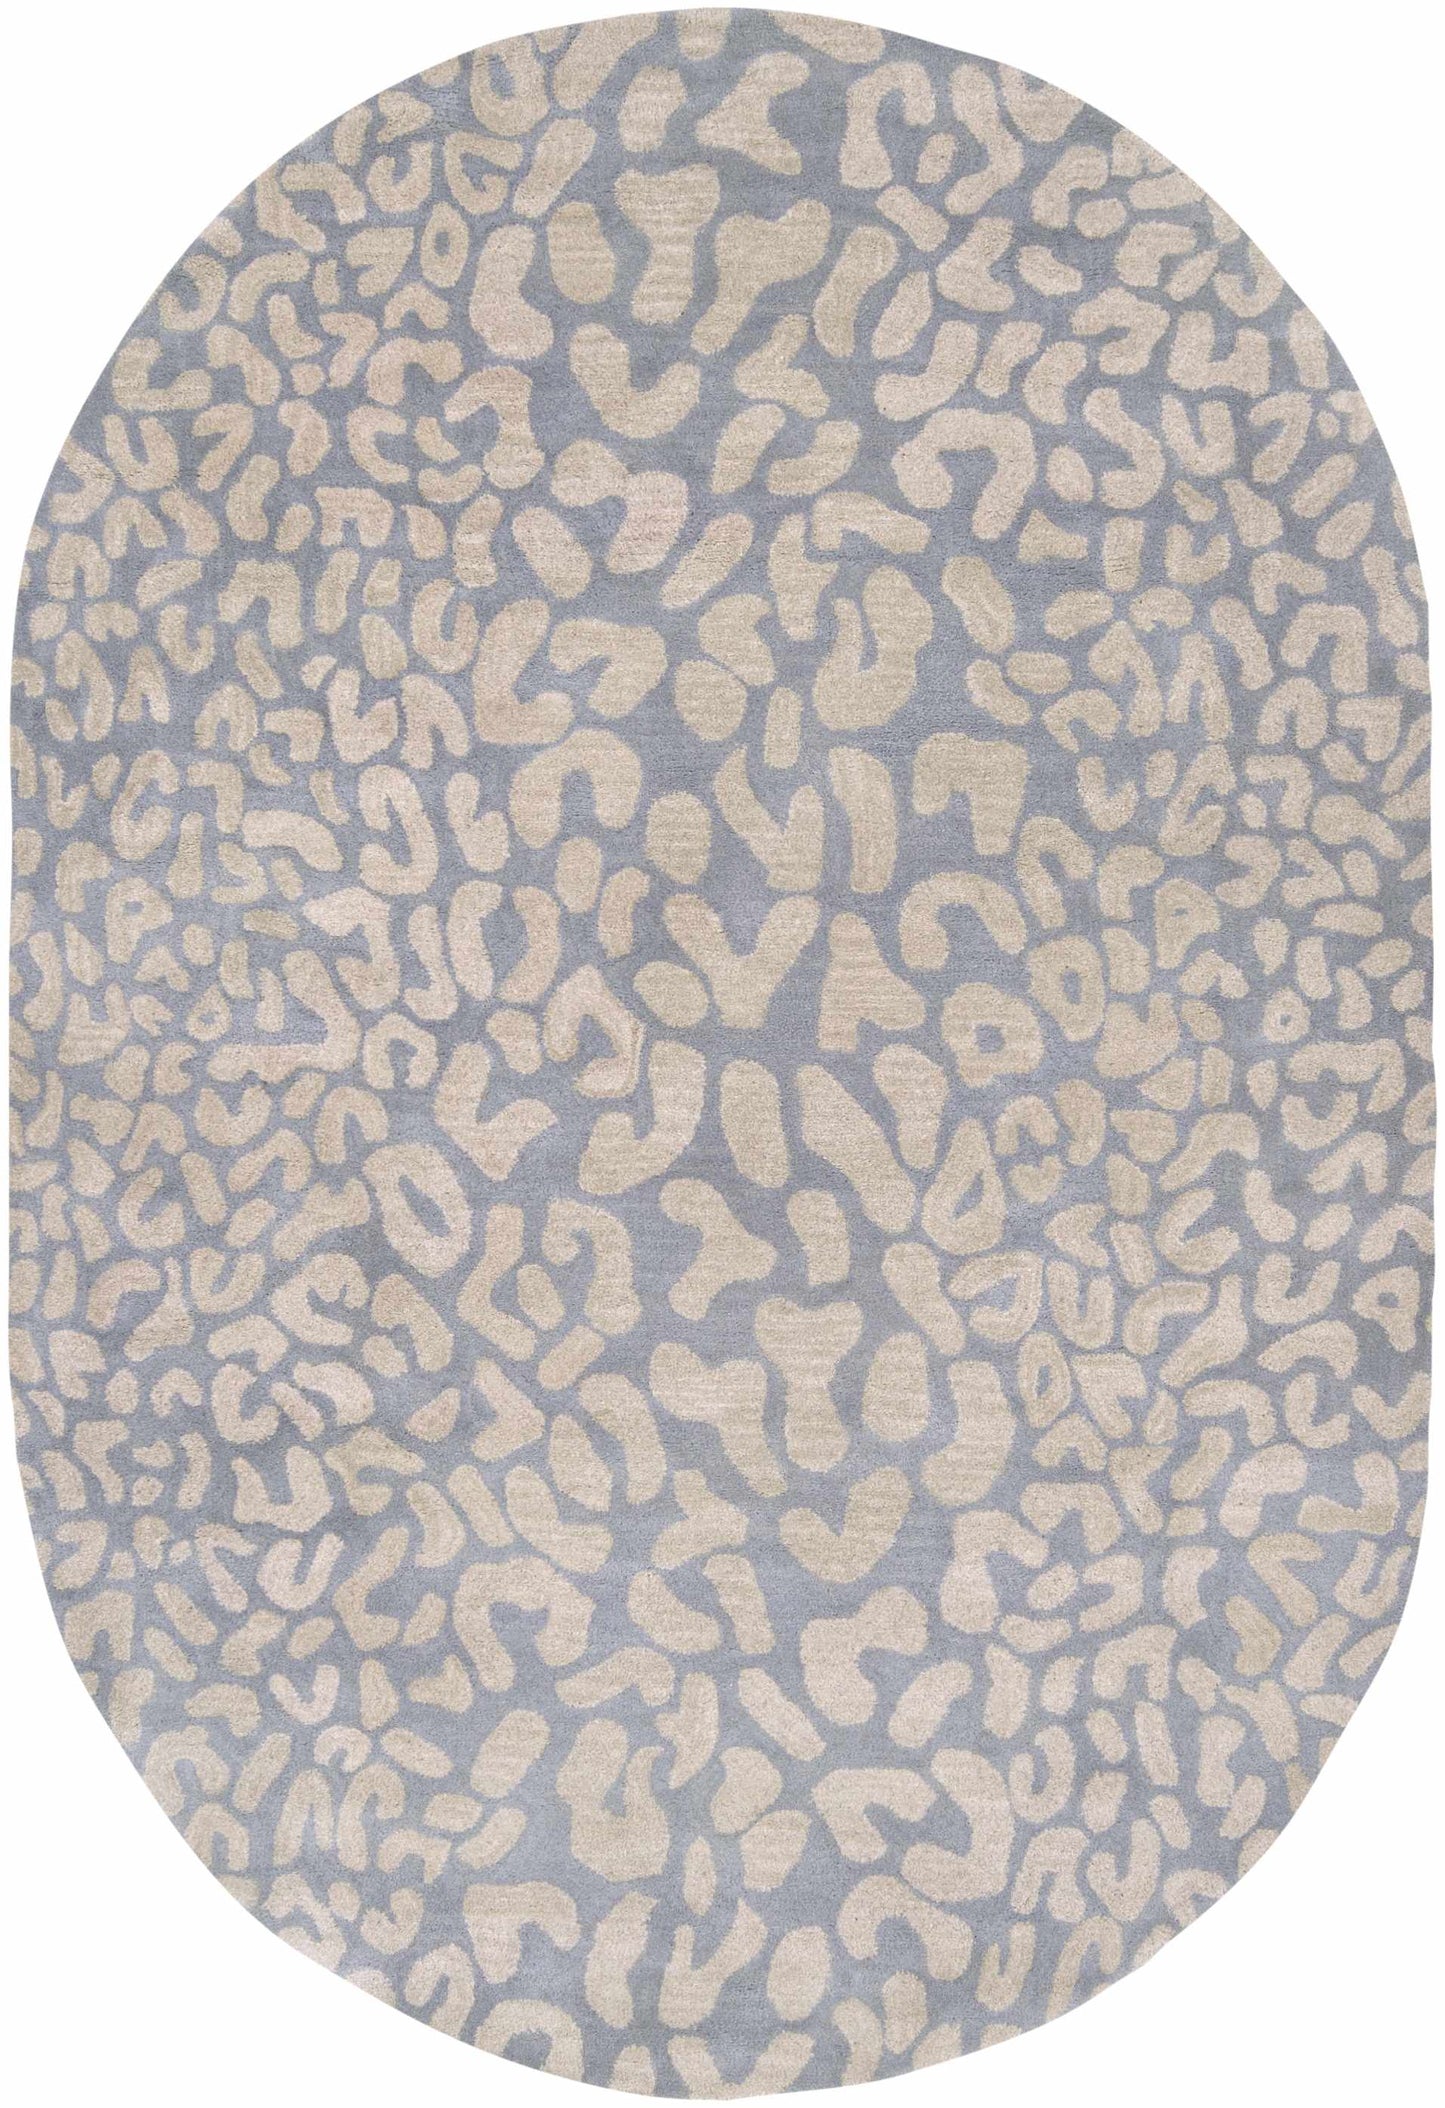 Boutique Rugs Rugs 6' x 9' Oval Curwensville Leopard Print Area Rug